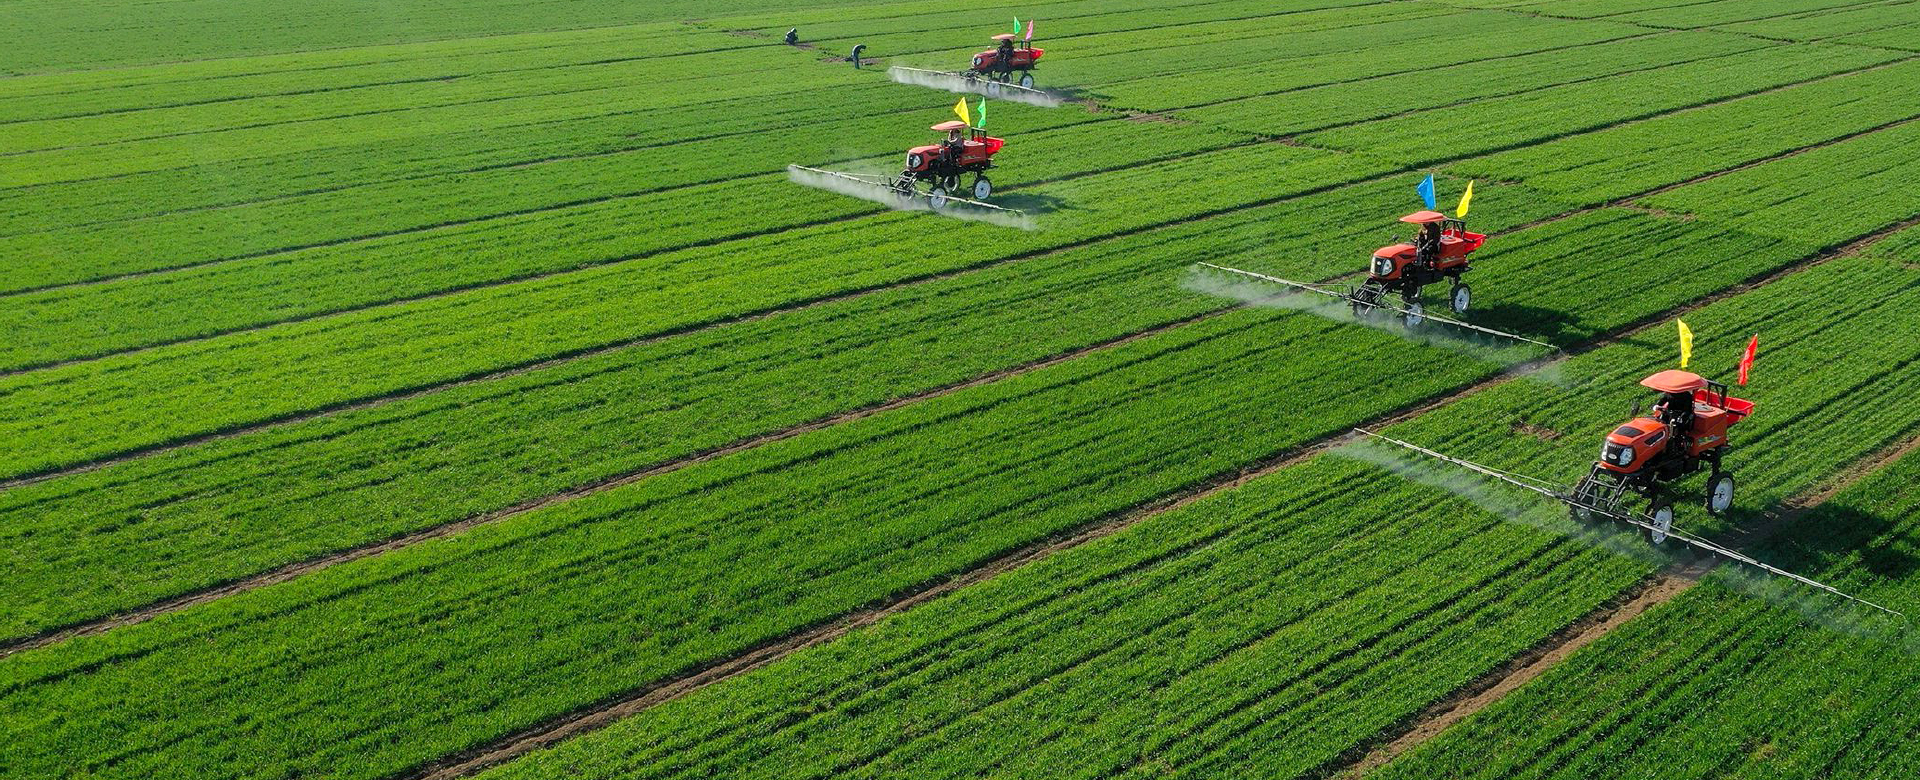 Pay attention to these 9 things when spraying herbicides!